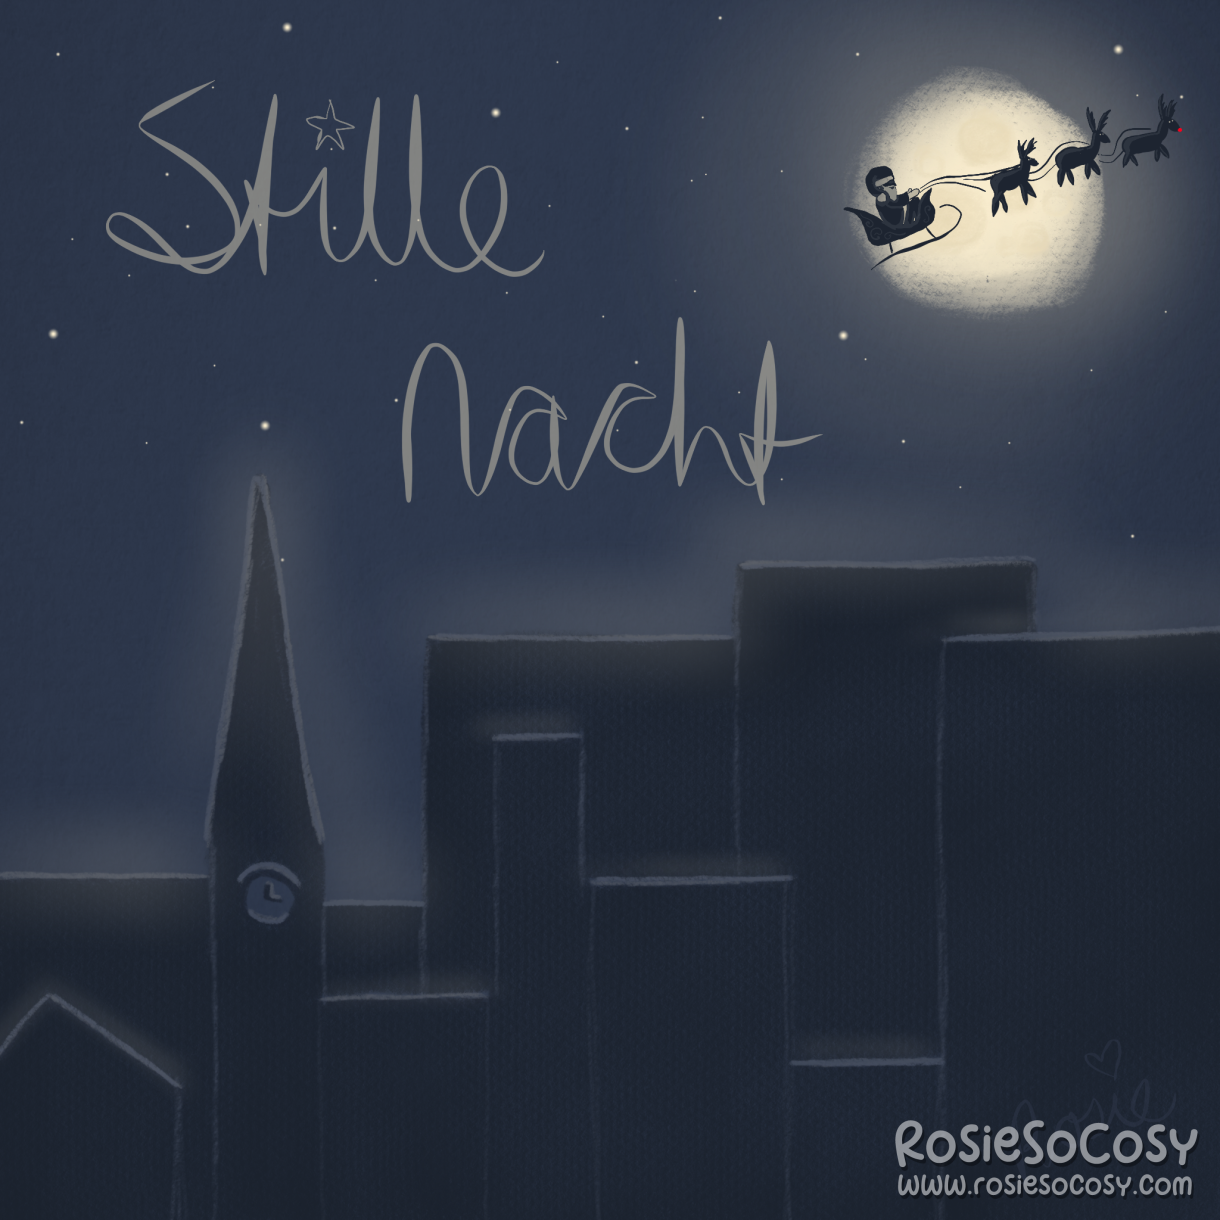 Stille Nacht. A quick drawing of a nighttime setting with a church and several high buildings in the sky. The buildings are all really dark blue silhouettes. The sky is a medium to dark blue and there's a white/yellow moon in it. On the left it says Stille Nacht (which is Dutch for Silent Night), and on the right, over the moon, you can see Santa's sleigh with his reindeer.